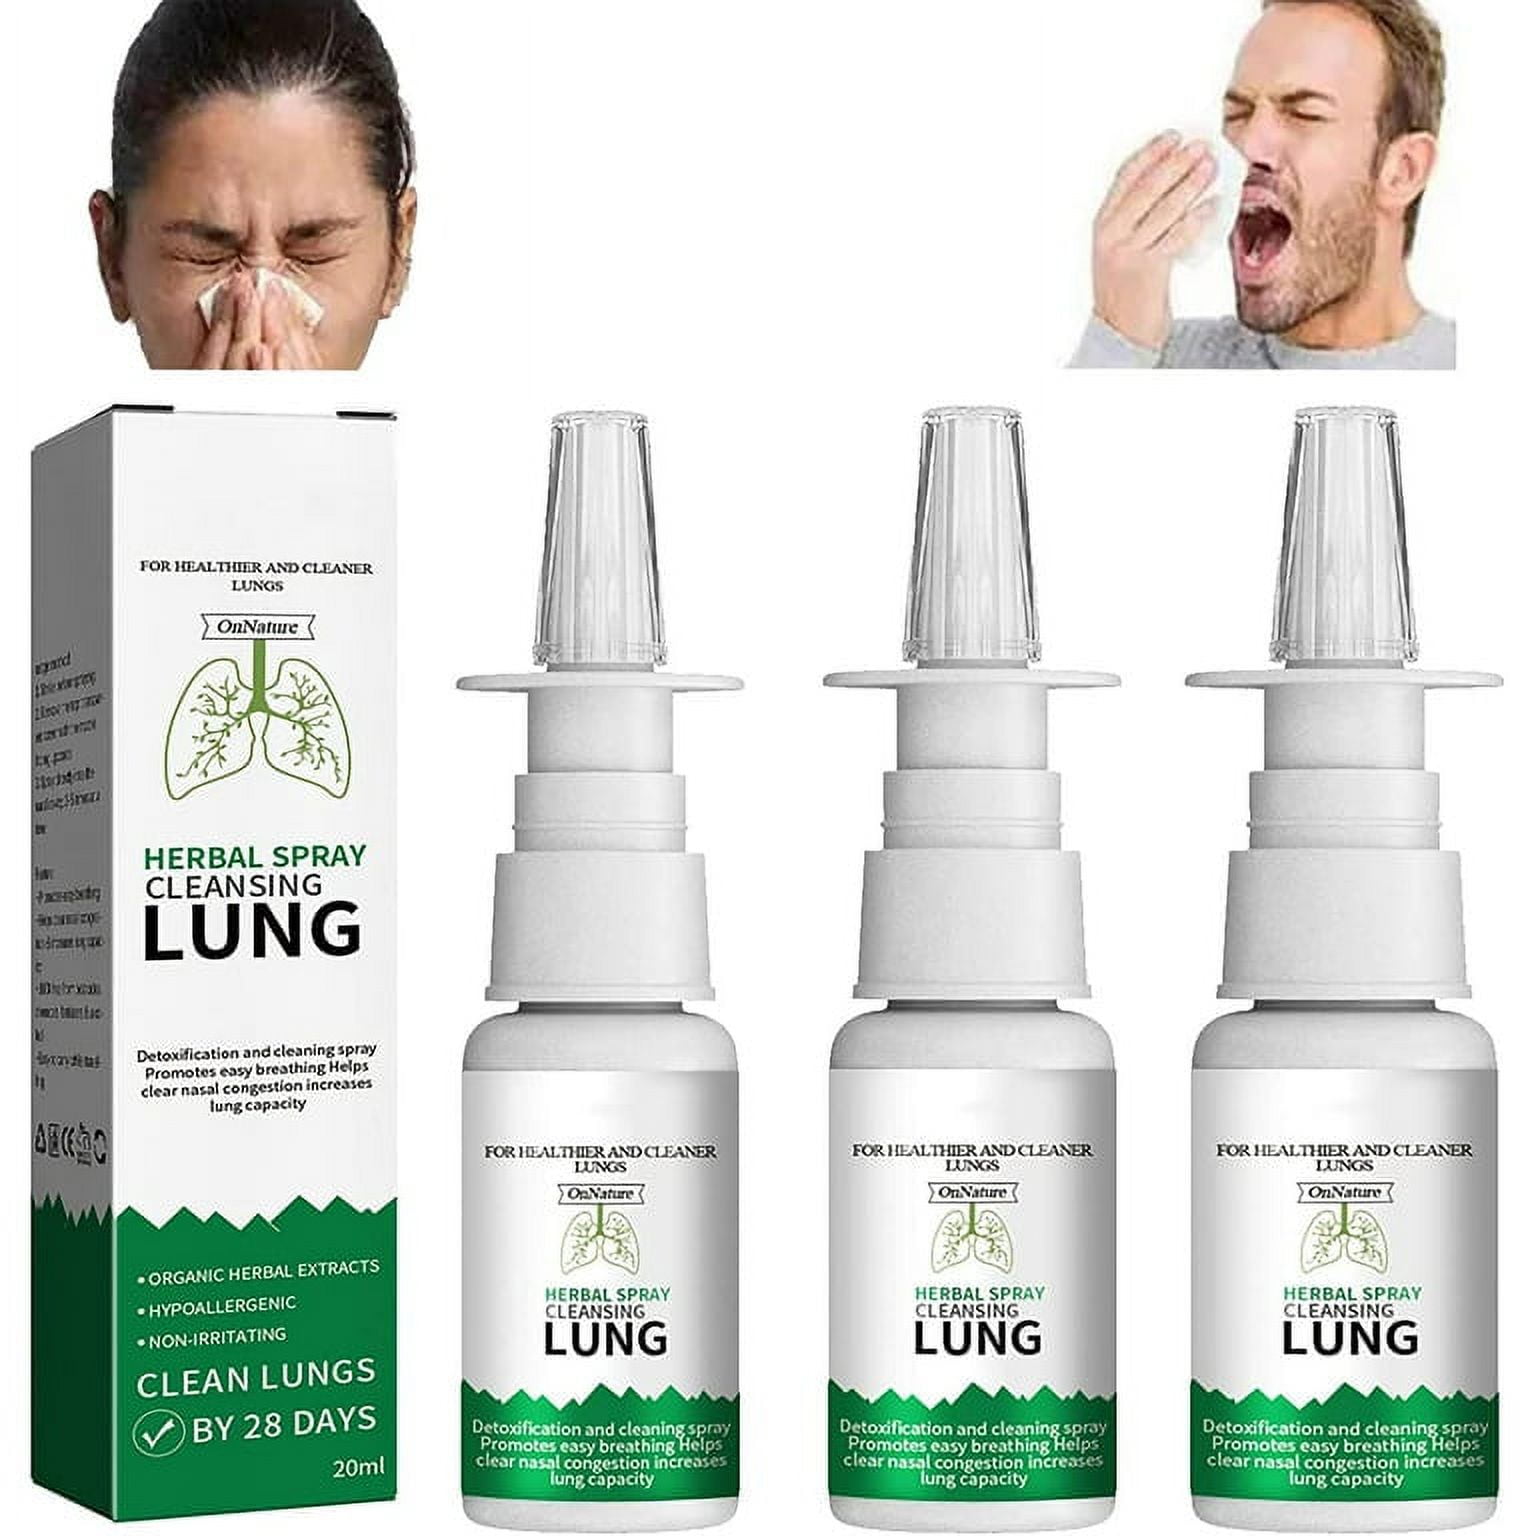 LungCare® Organic Herbal Lung Cleansing Spray - Buy Today Get 55